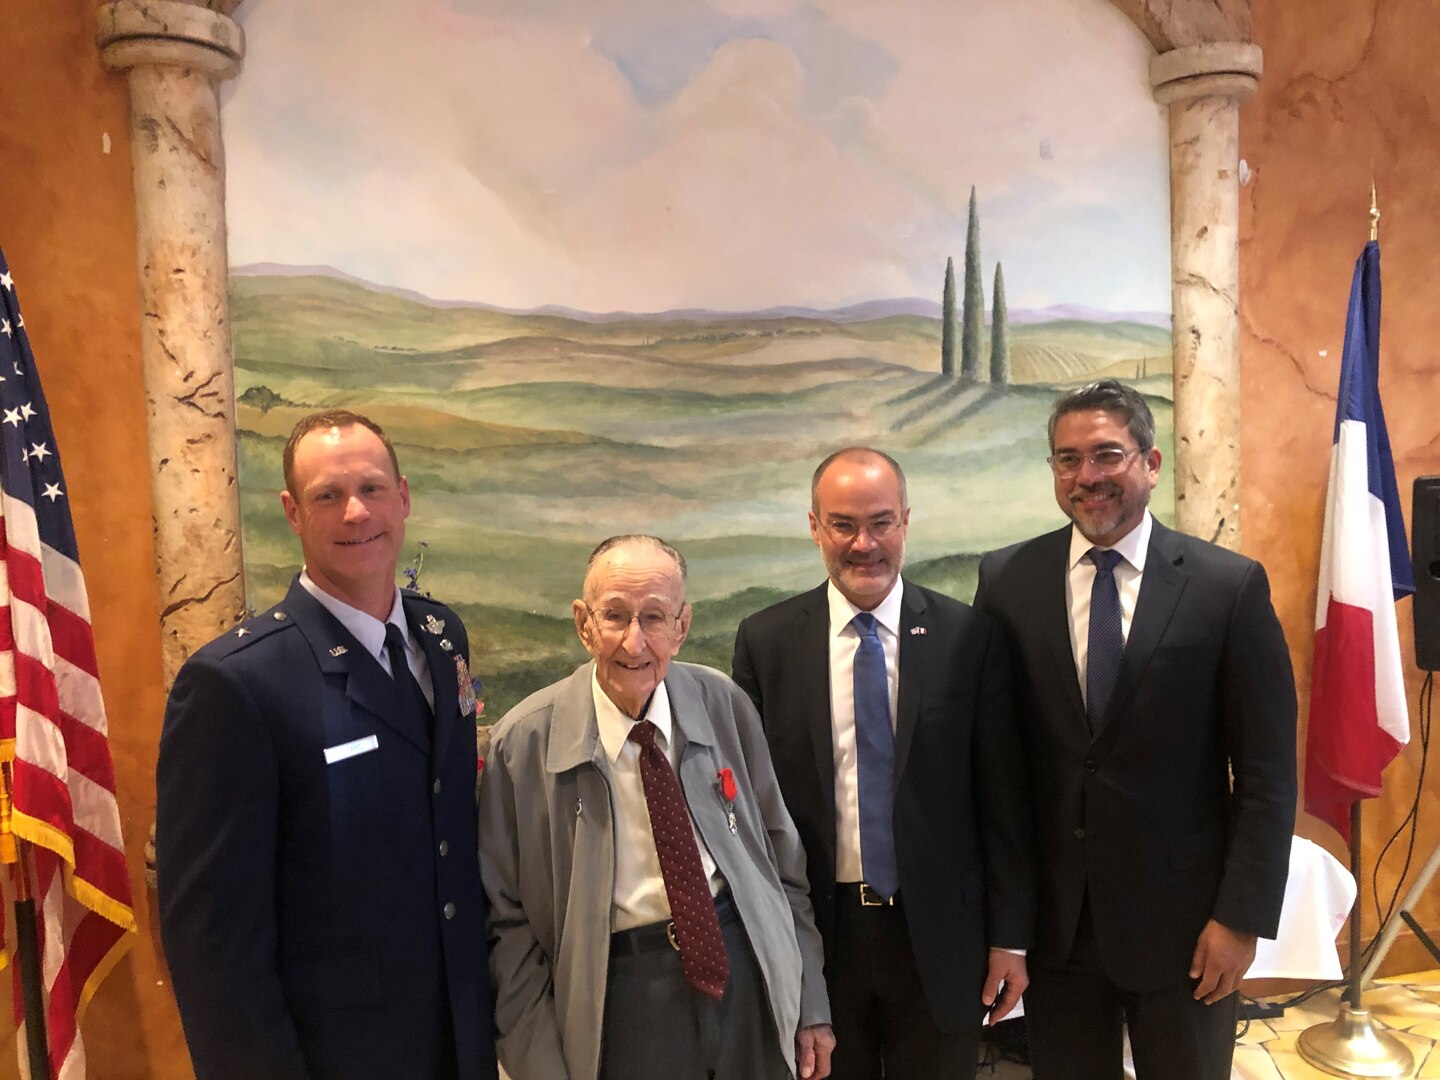 Long-time San Antonio resident and United States Army Air Corps World War II veteran Roland Dullnig (second from left) stands with U.S. Air Force Brig. Gen. James Sears (left), Air Education and Training Command director of plans, programs and requirements, as well as the Consul General of France in Houston, Alexis Andres (second from right), after being presented the French Legion of Honor medal in a ceremony which included family and friends in San Antonio, Texas, Feb. 8, 2020.  The French Legion of Honor is a prestigious medal and has been recently awarded by the people of France to American Veterans who fought for the liberation of France during World War II. (U.S. Air Force photo / Maj. Kim Garbett)